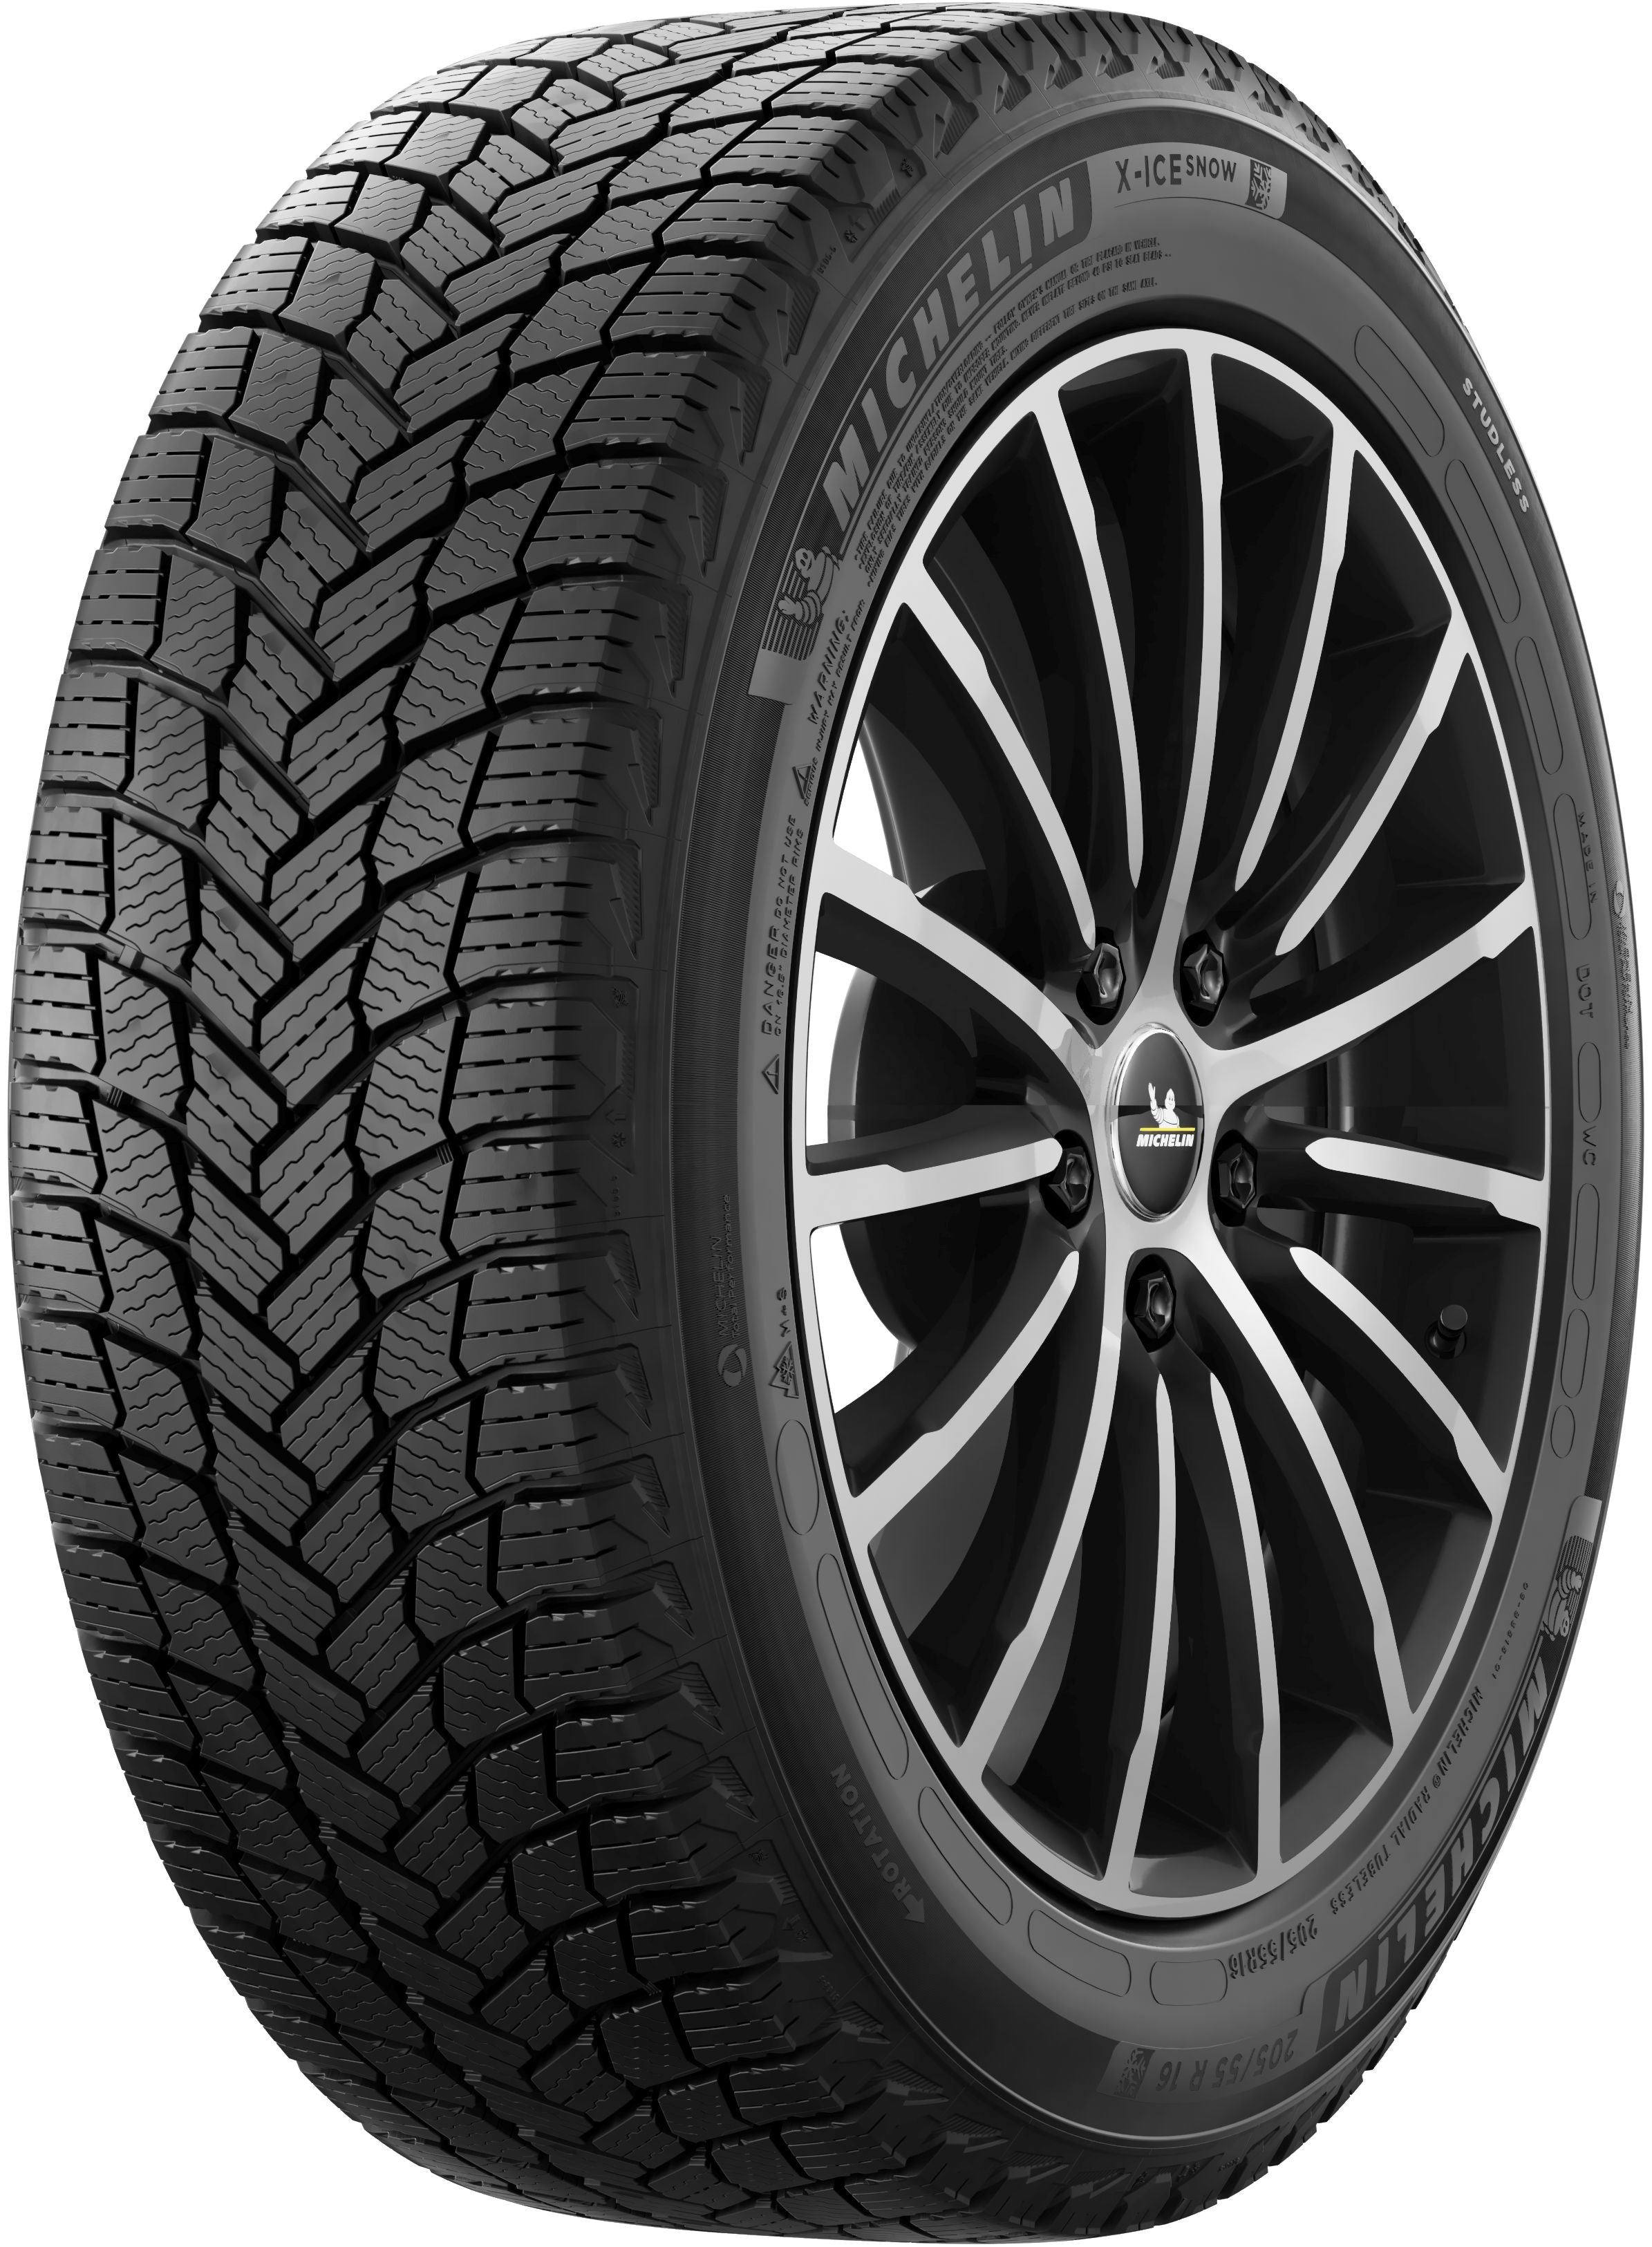 Toyo Tires - Celsius CUV - 235/55R19 XL 105V BSW - All weather